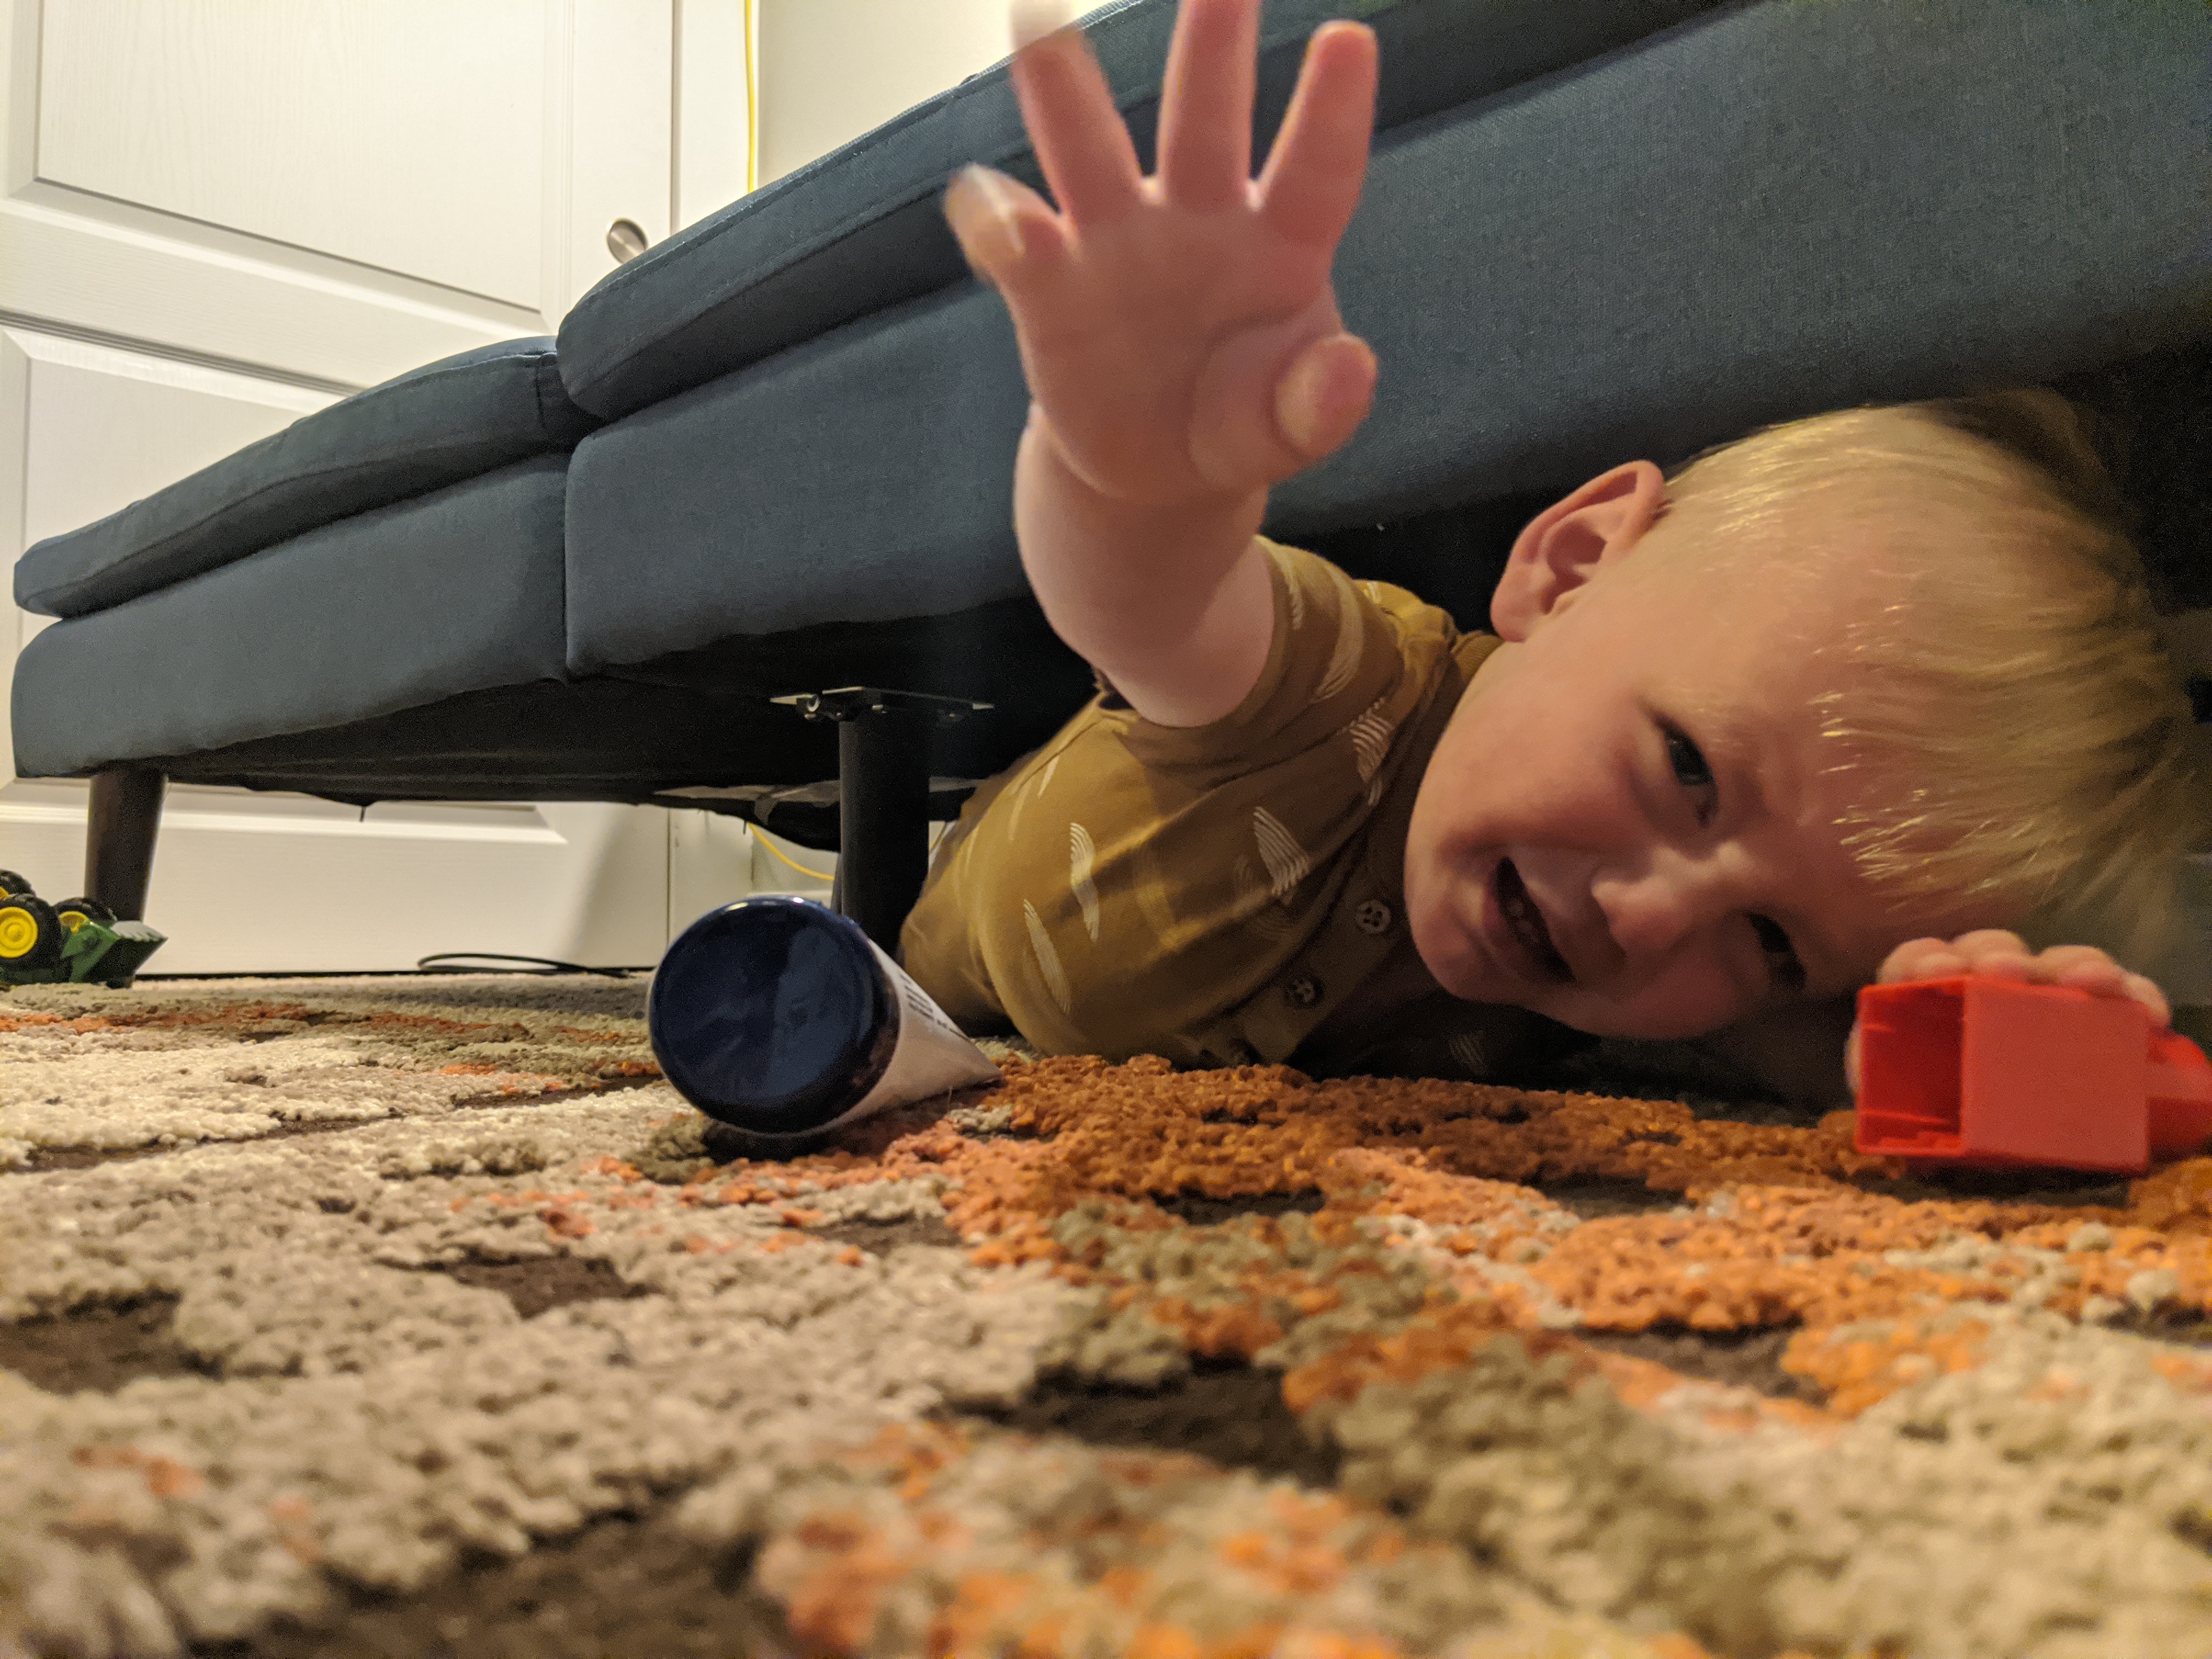 Owen goes on a reconnaissance mission under the couch.